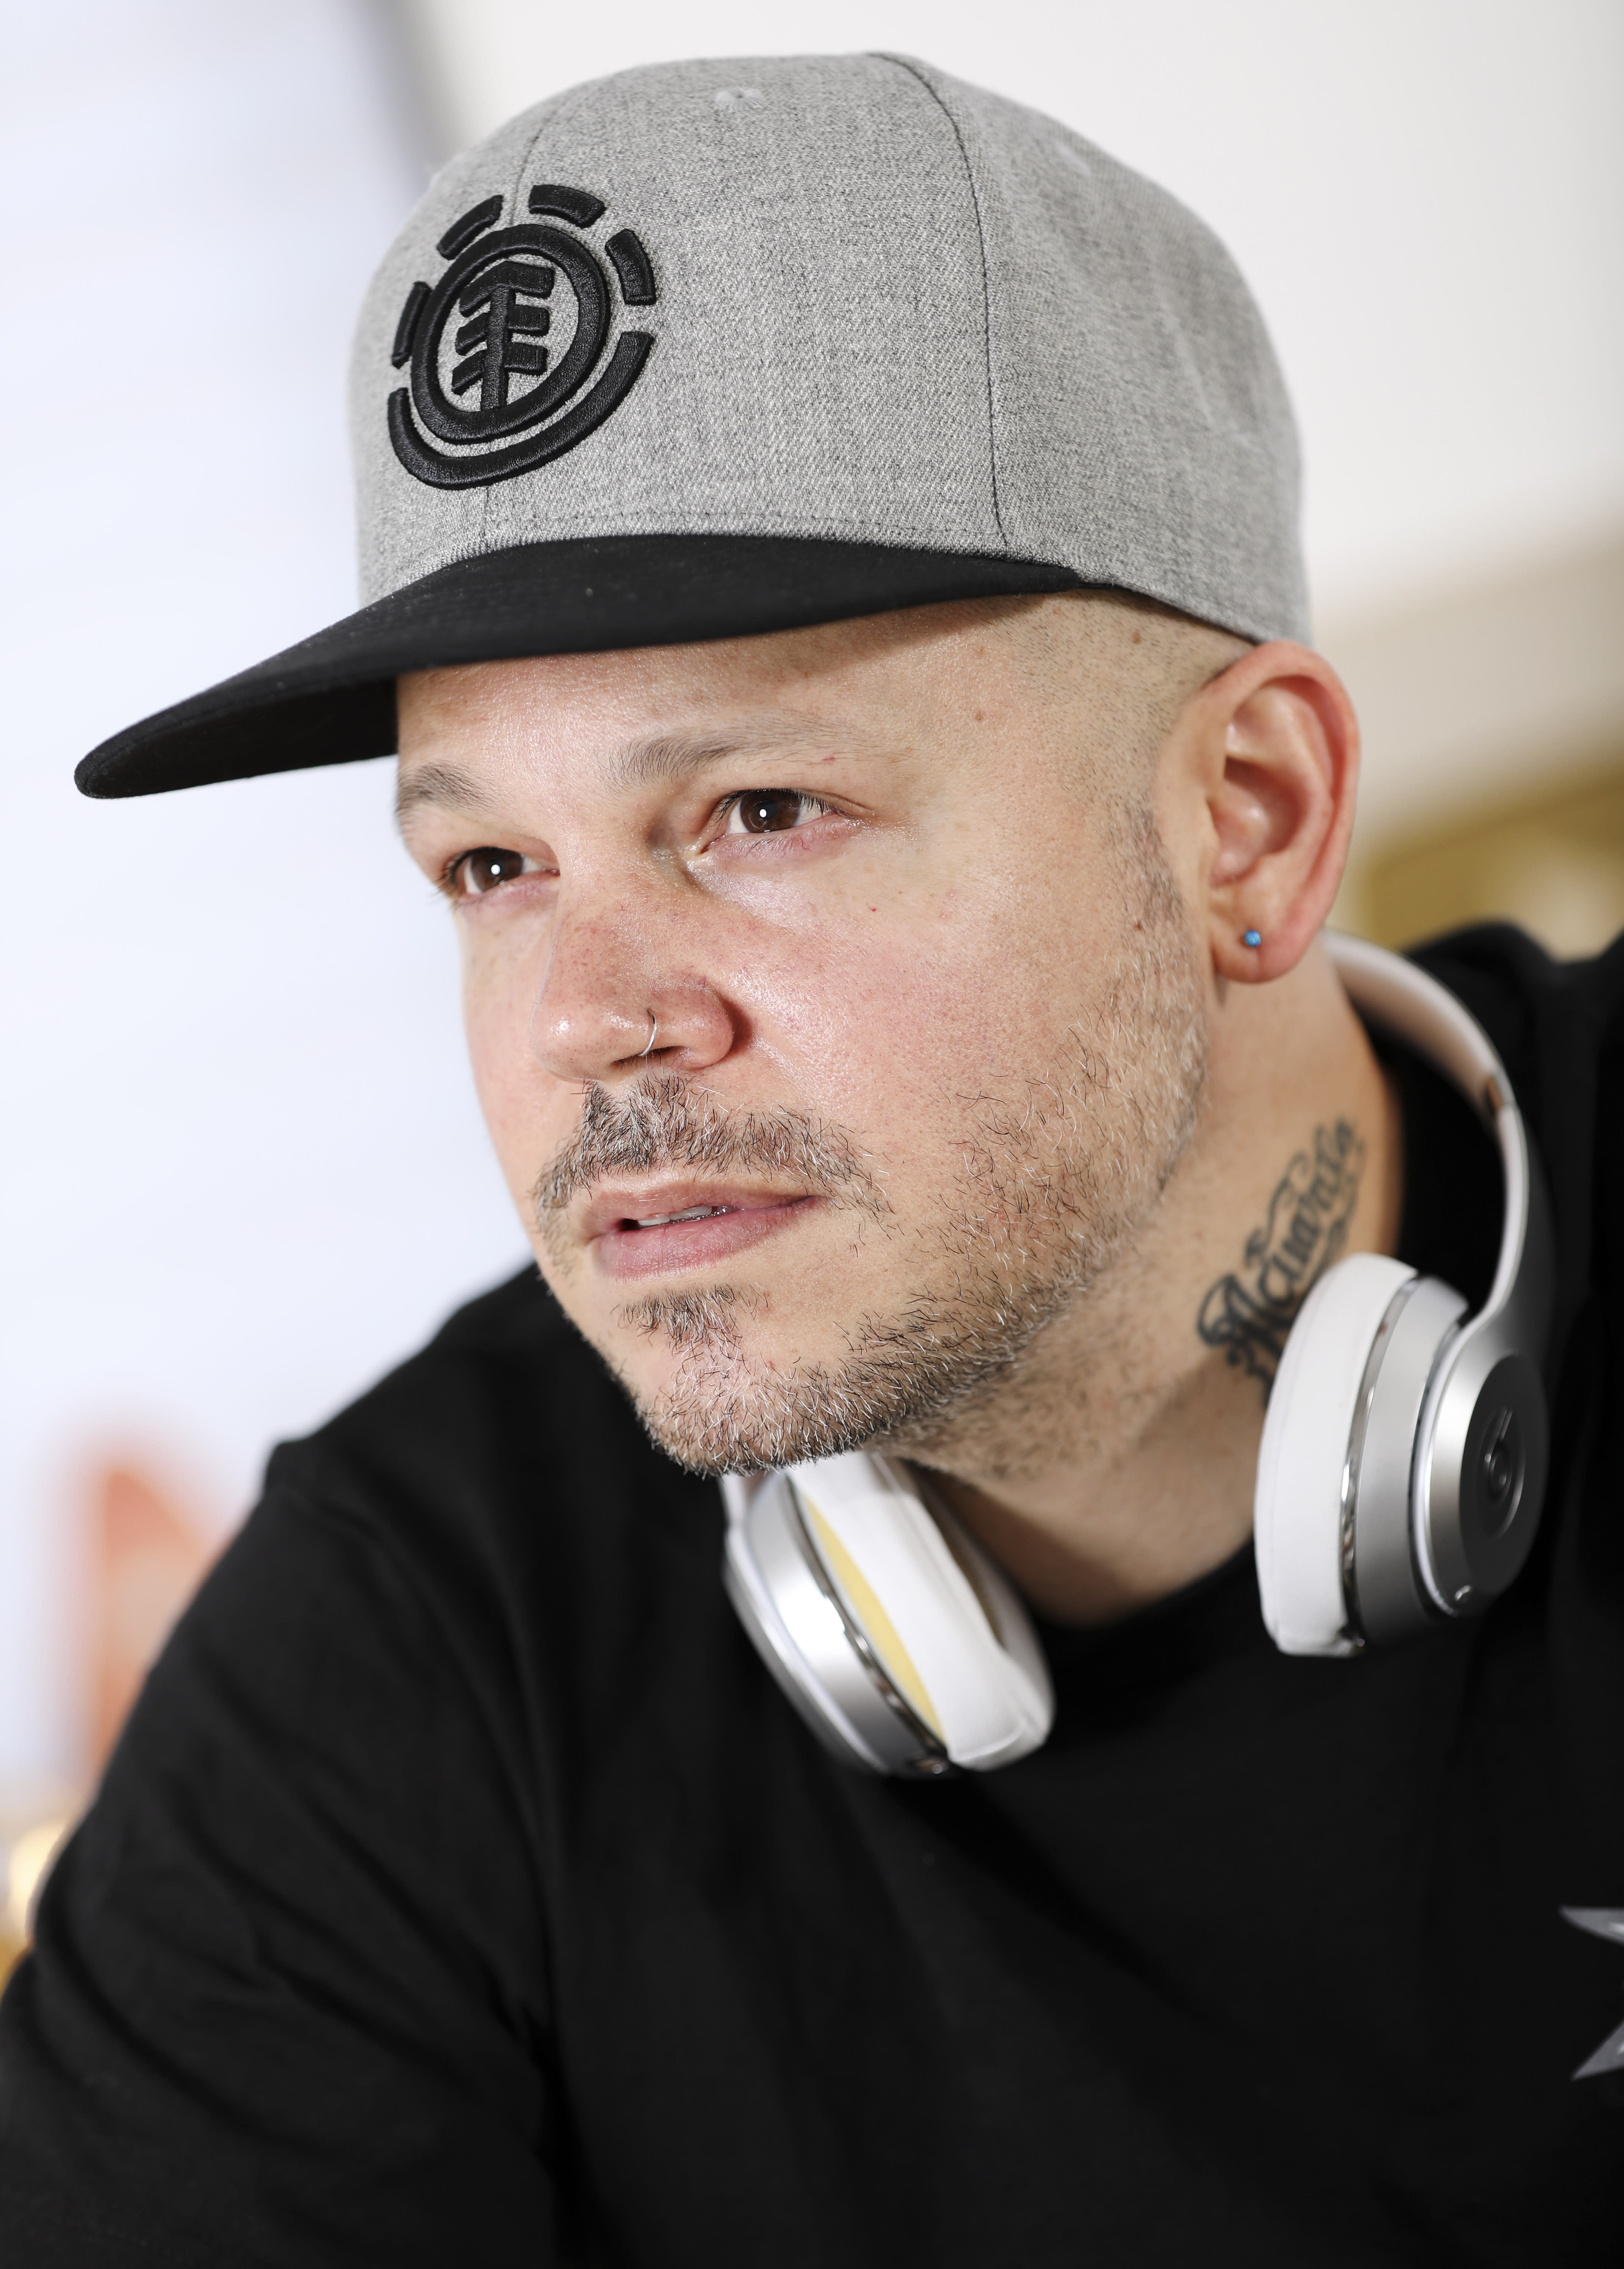 Residente worked with scientists to create his new album